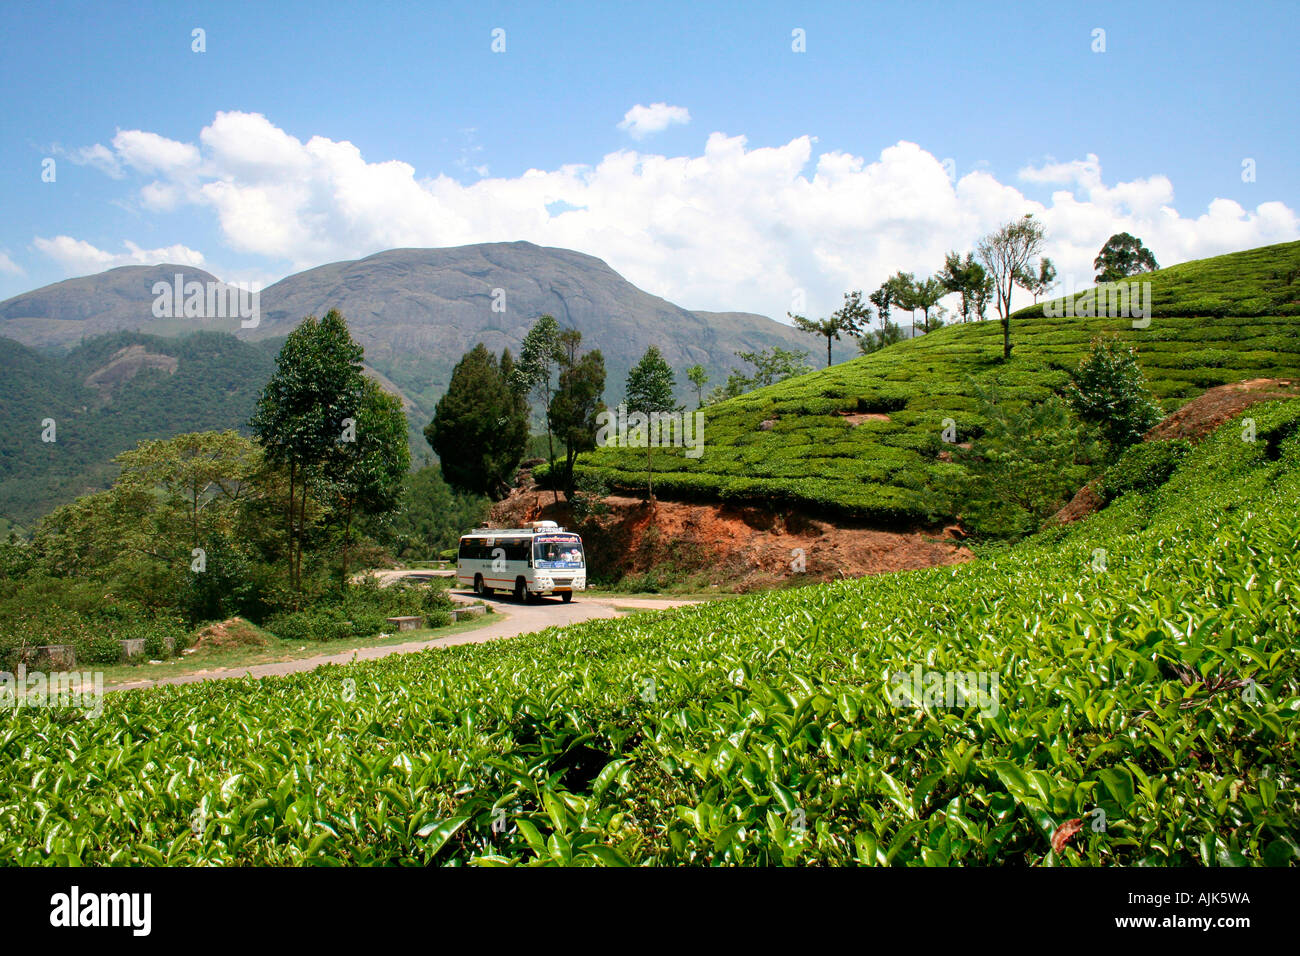 A bus carrying tourists arriving at the tea estate in Munnar, Kerala Stock Photo